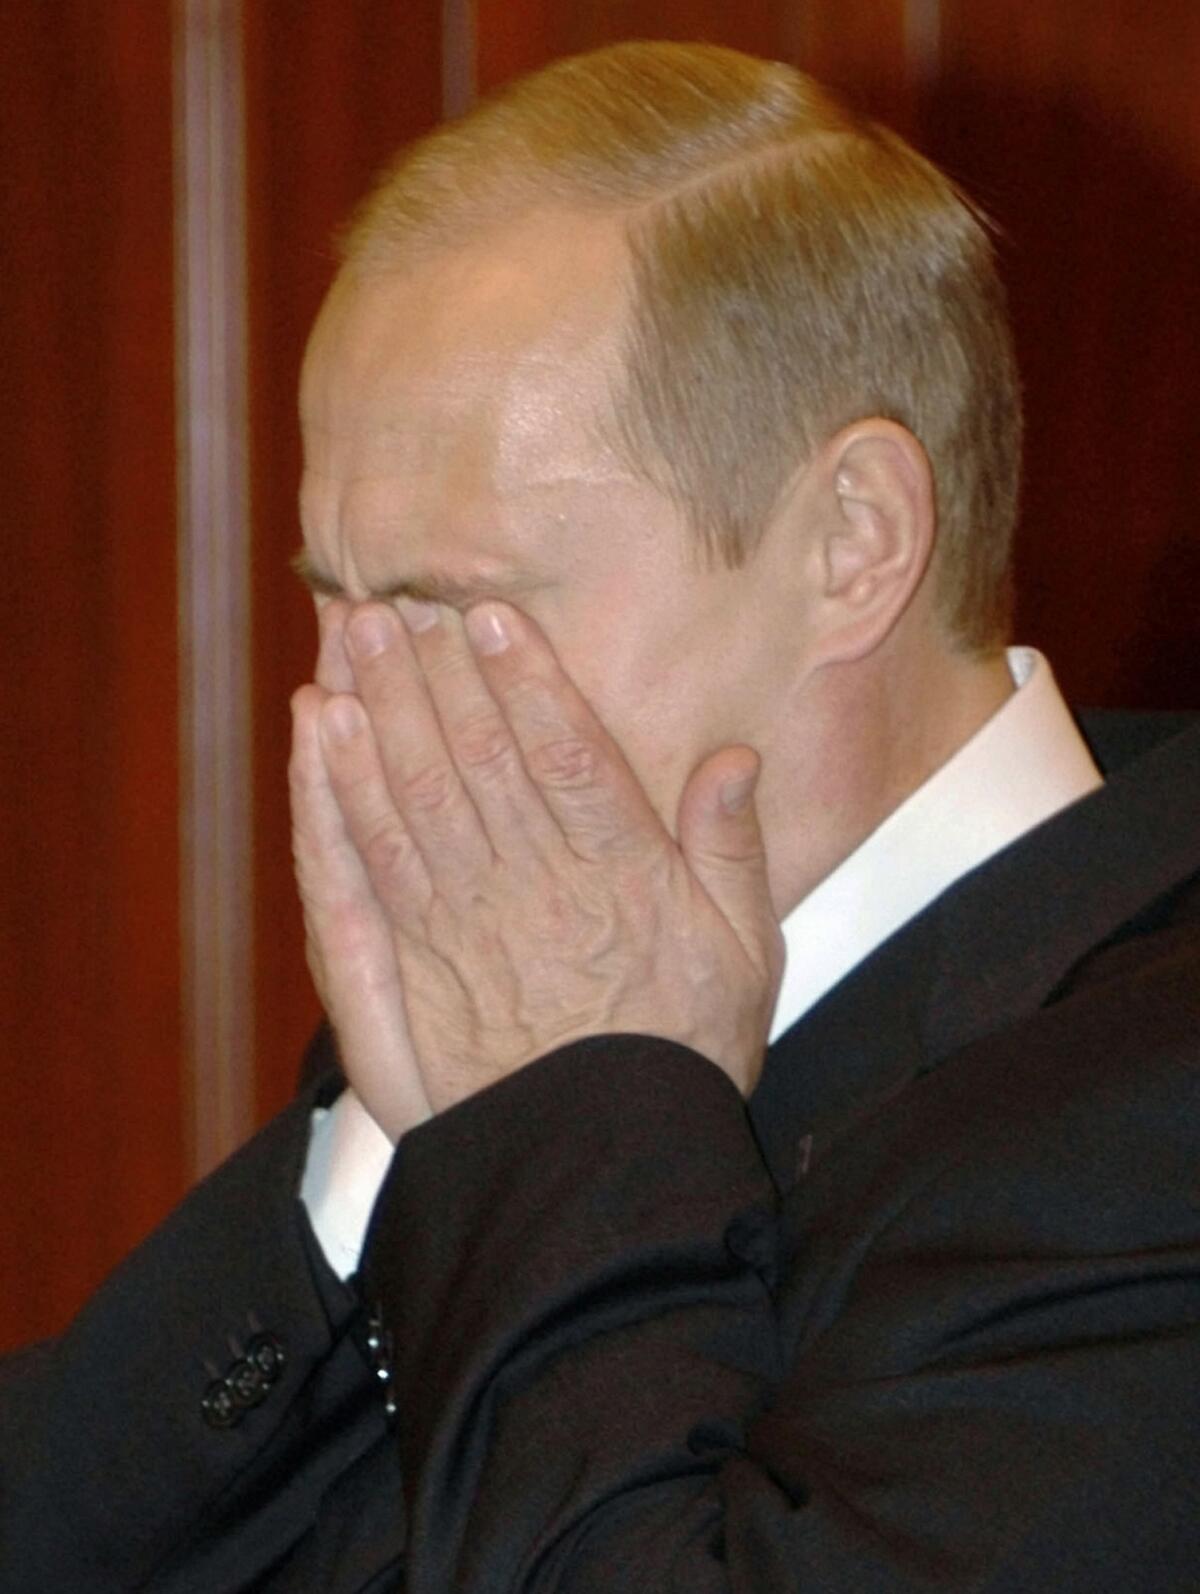 Russian President Vladimir Putin reacts to the news that scores of hostages had died as special forces stormed a Moscow theater and freed hundreds of others held by Chechen rebels.